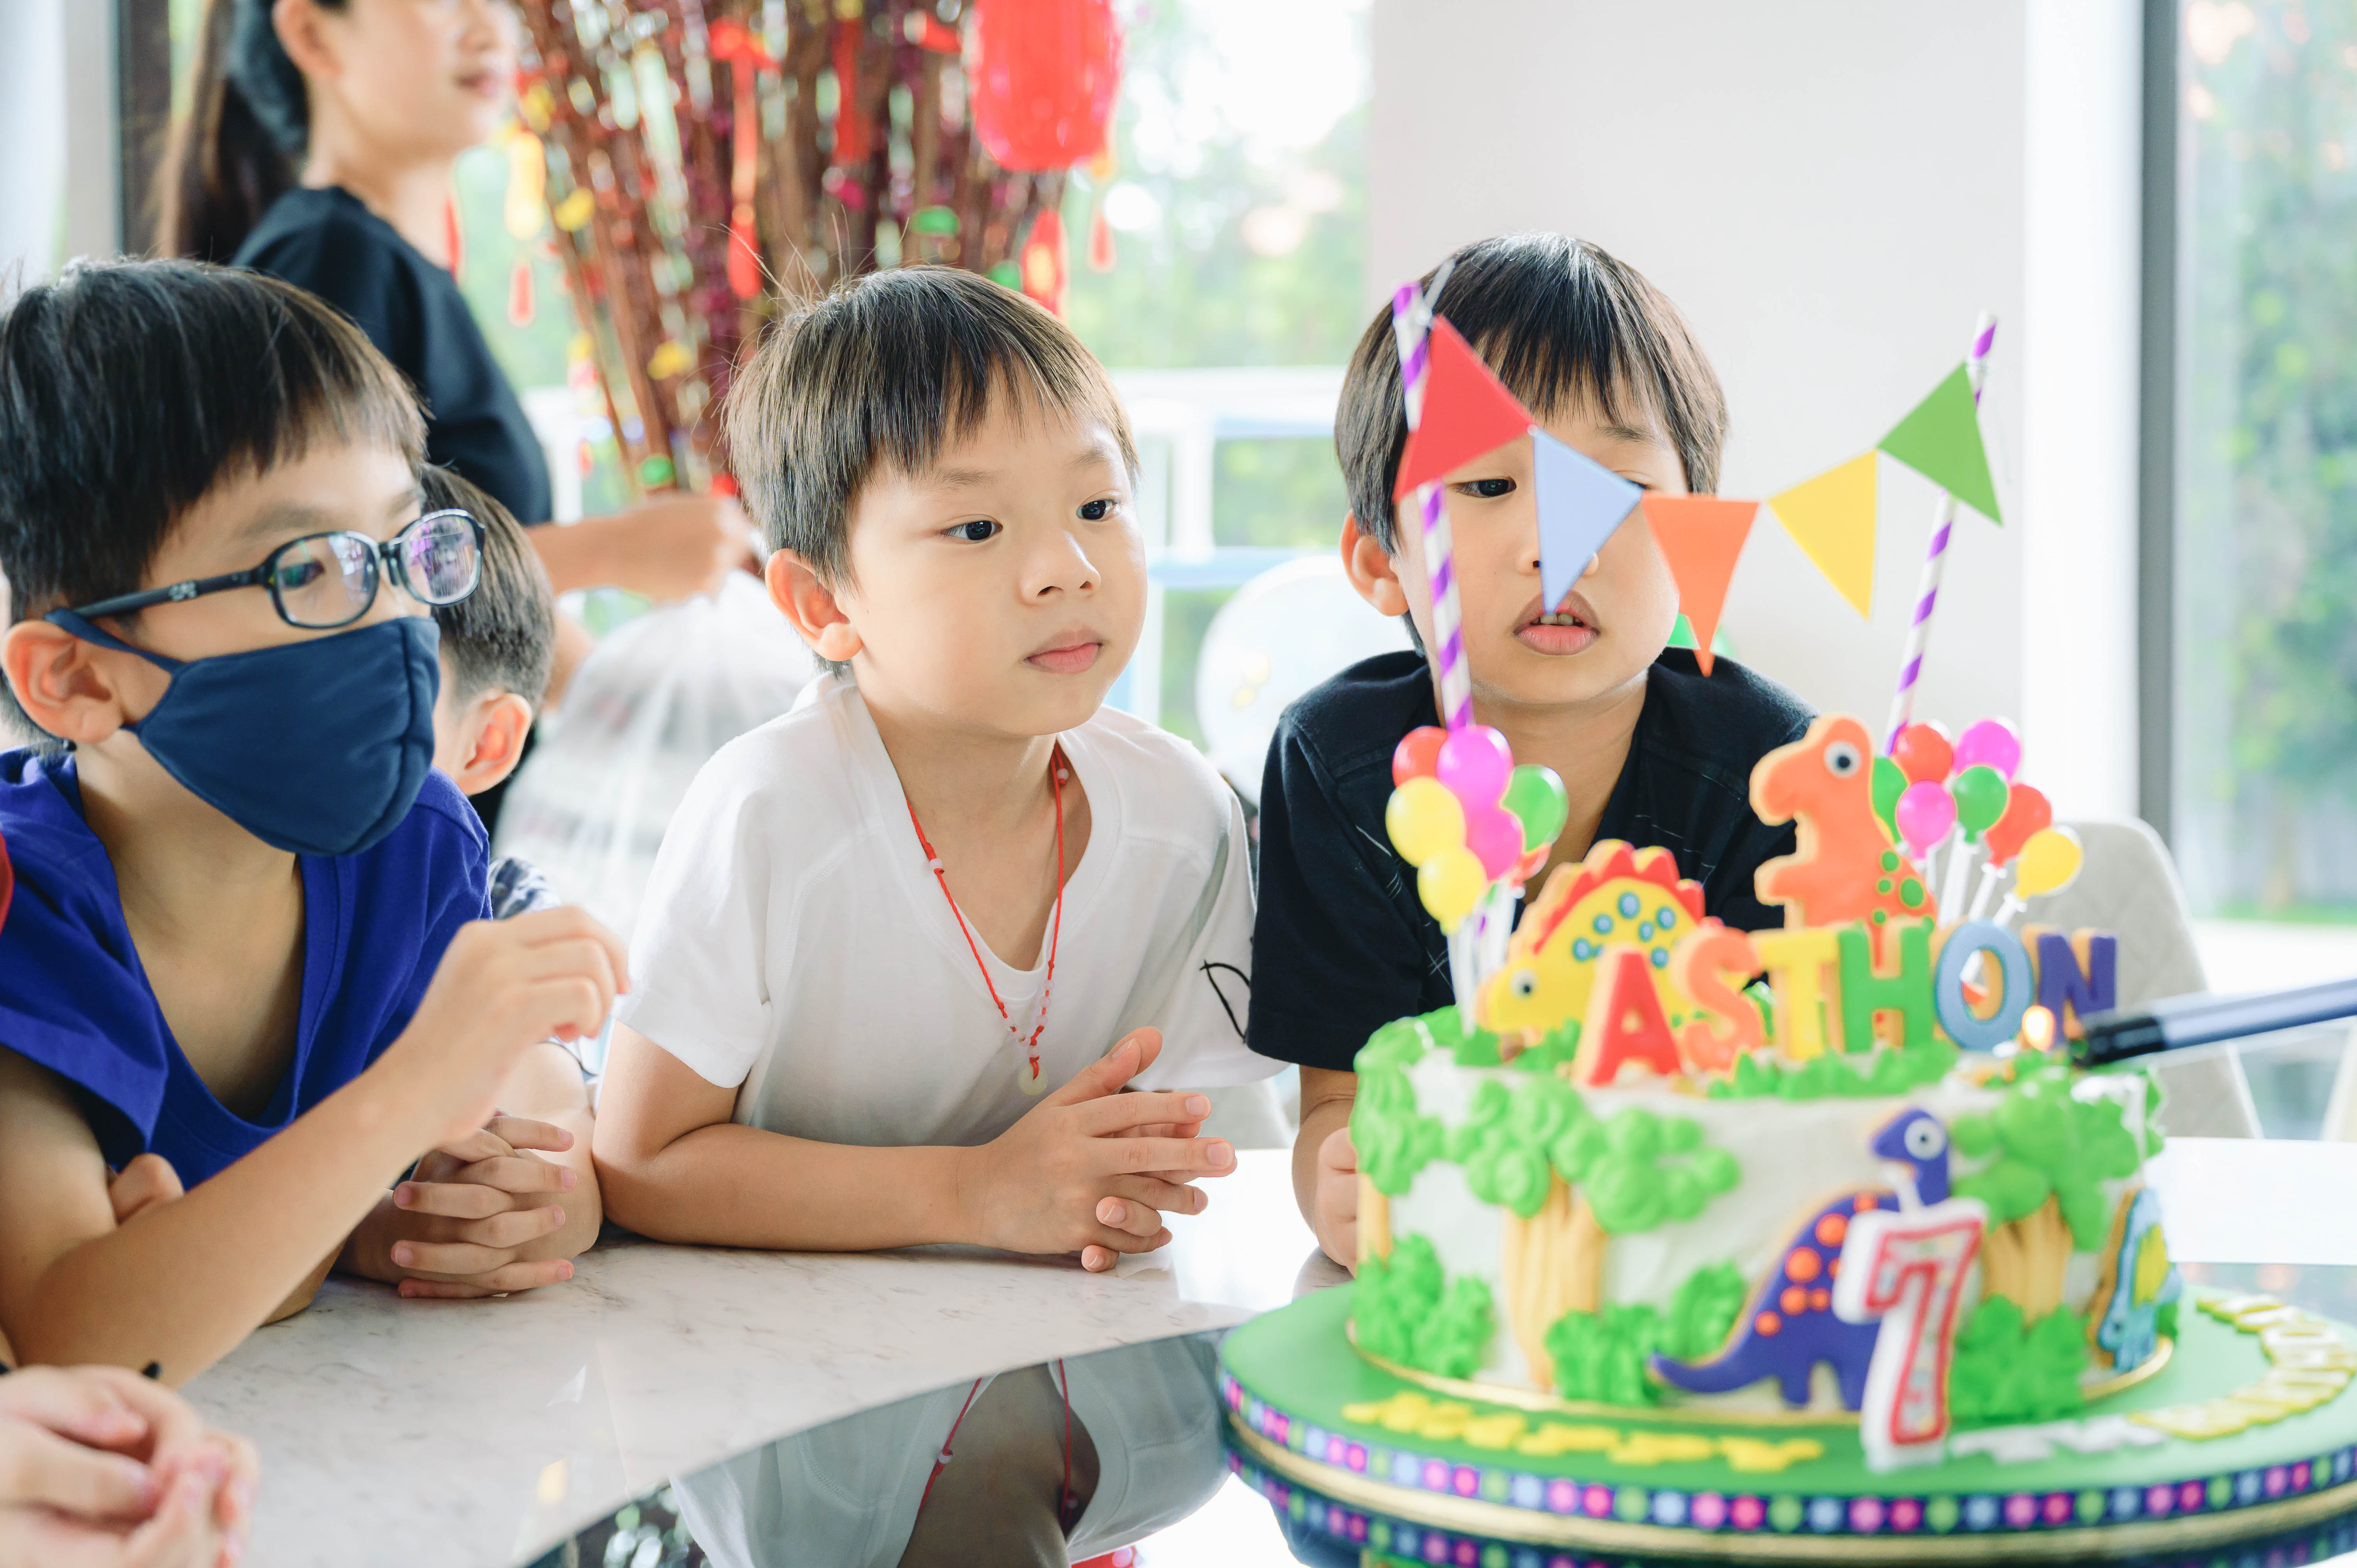 birthday party Photography for cake cutting